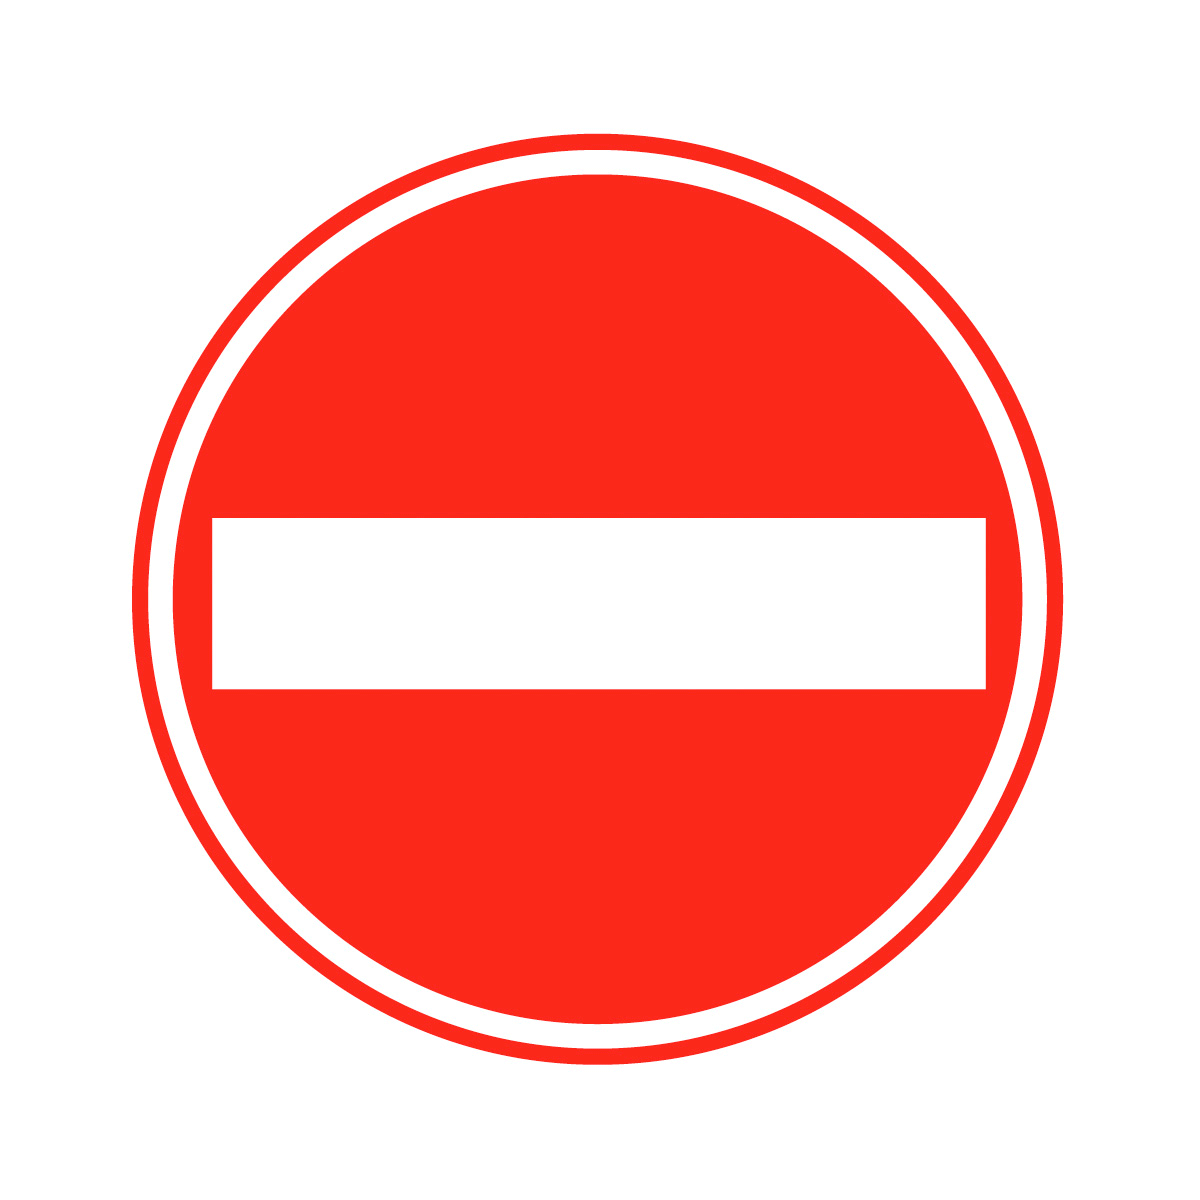 No Entry Signs - ClipArt Best